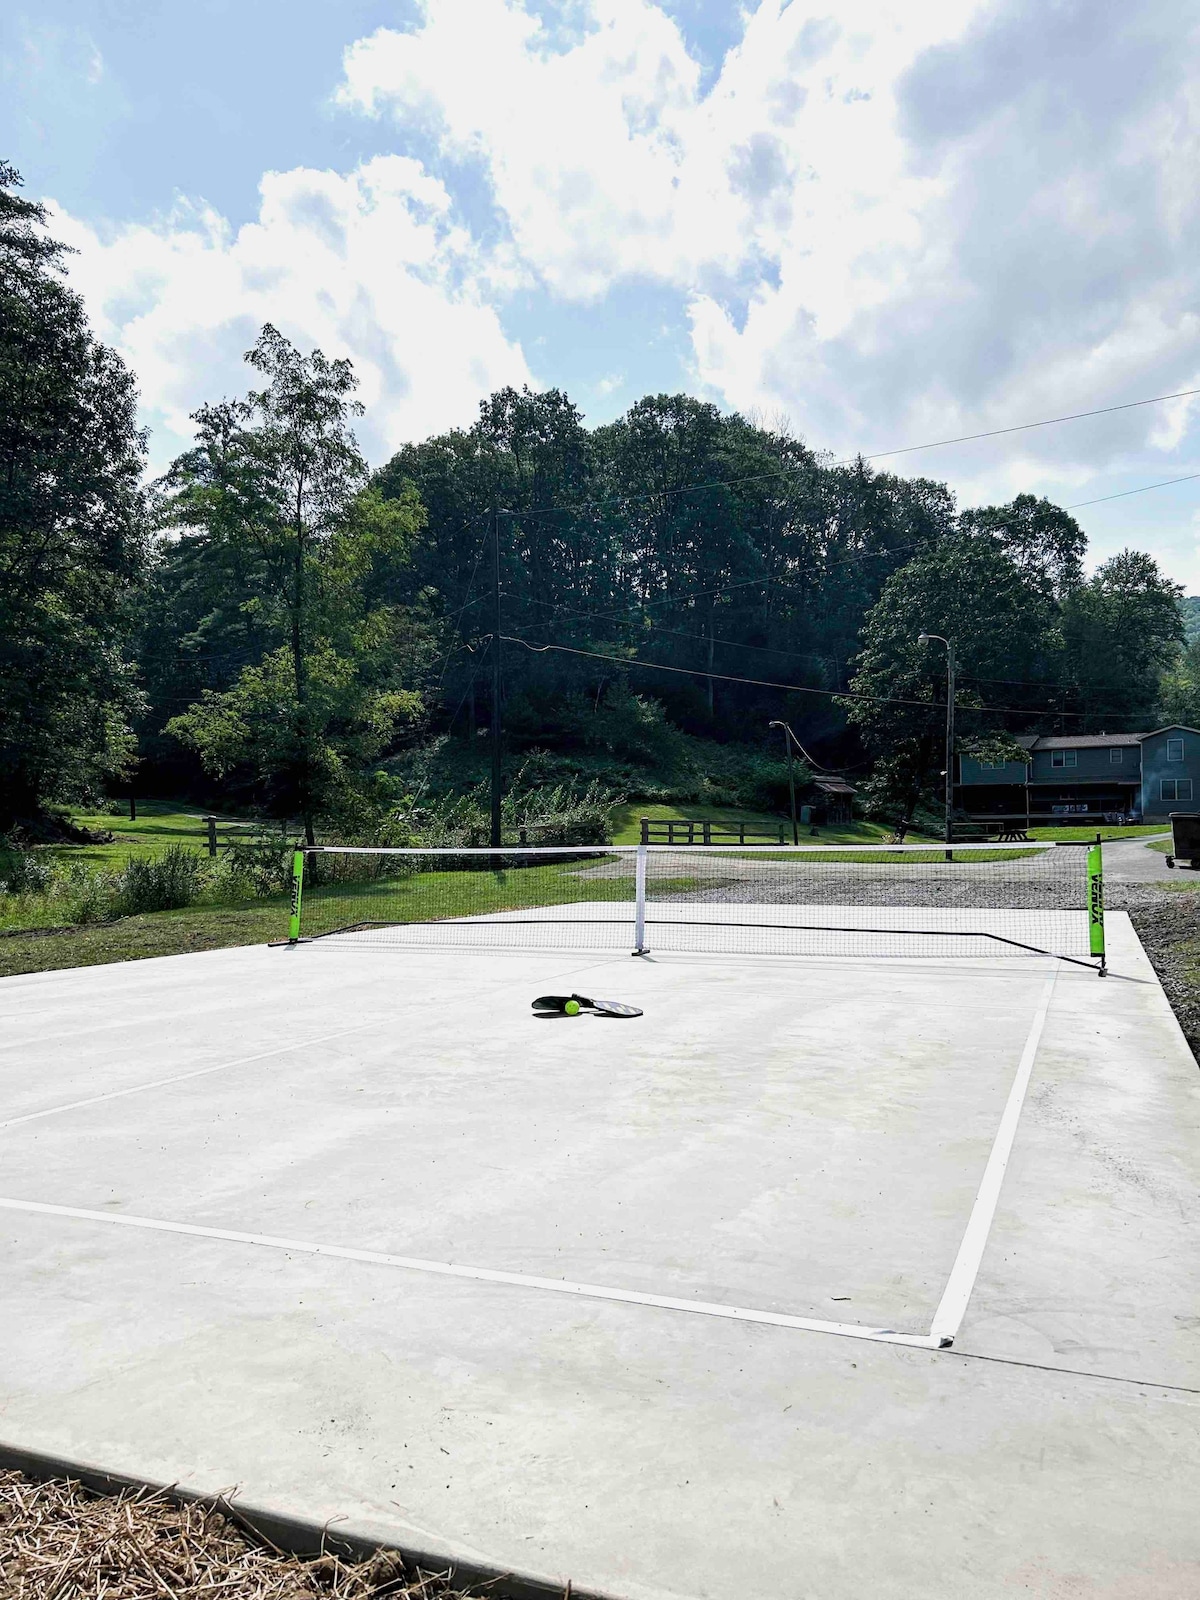 Brookside Retreat: spacious + pickle ball court!